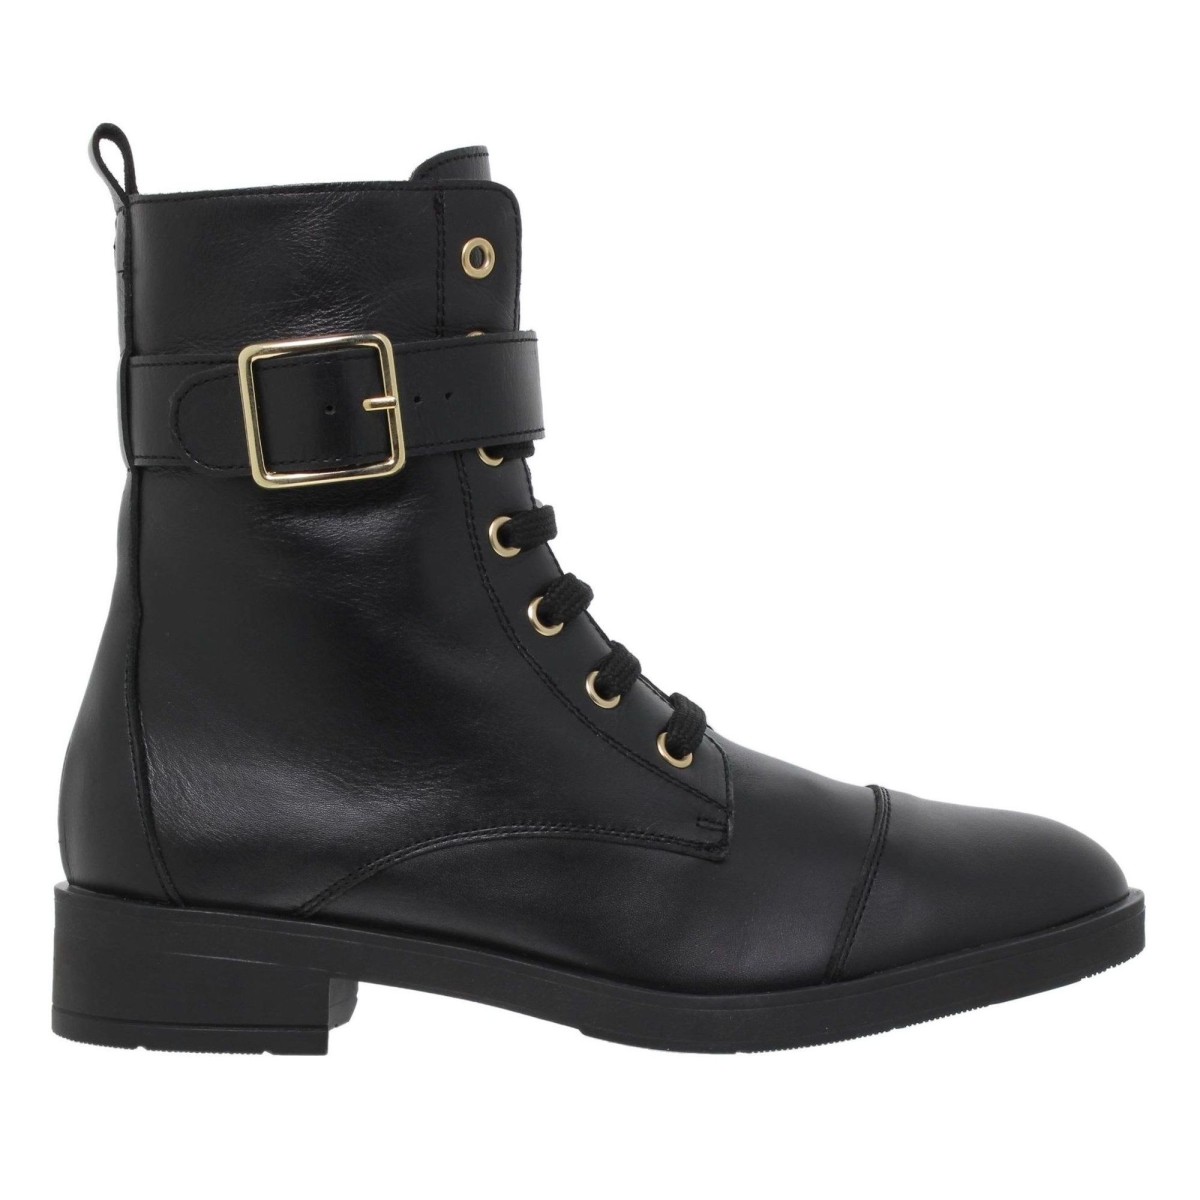 Black leather urban ankle boots by Exodus